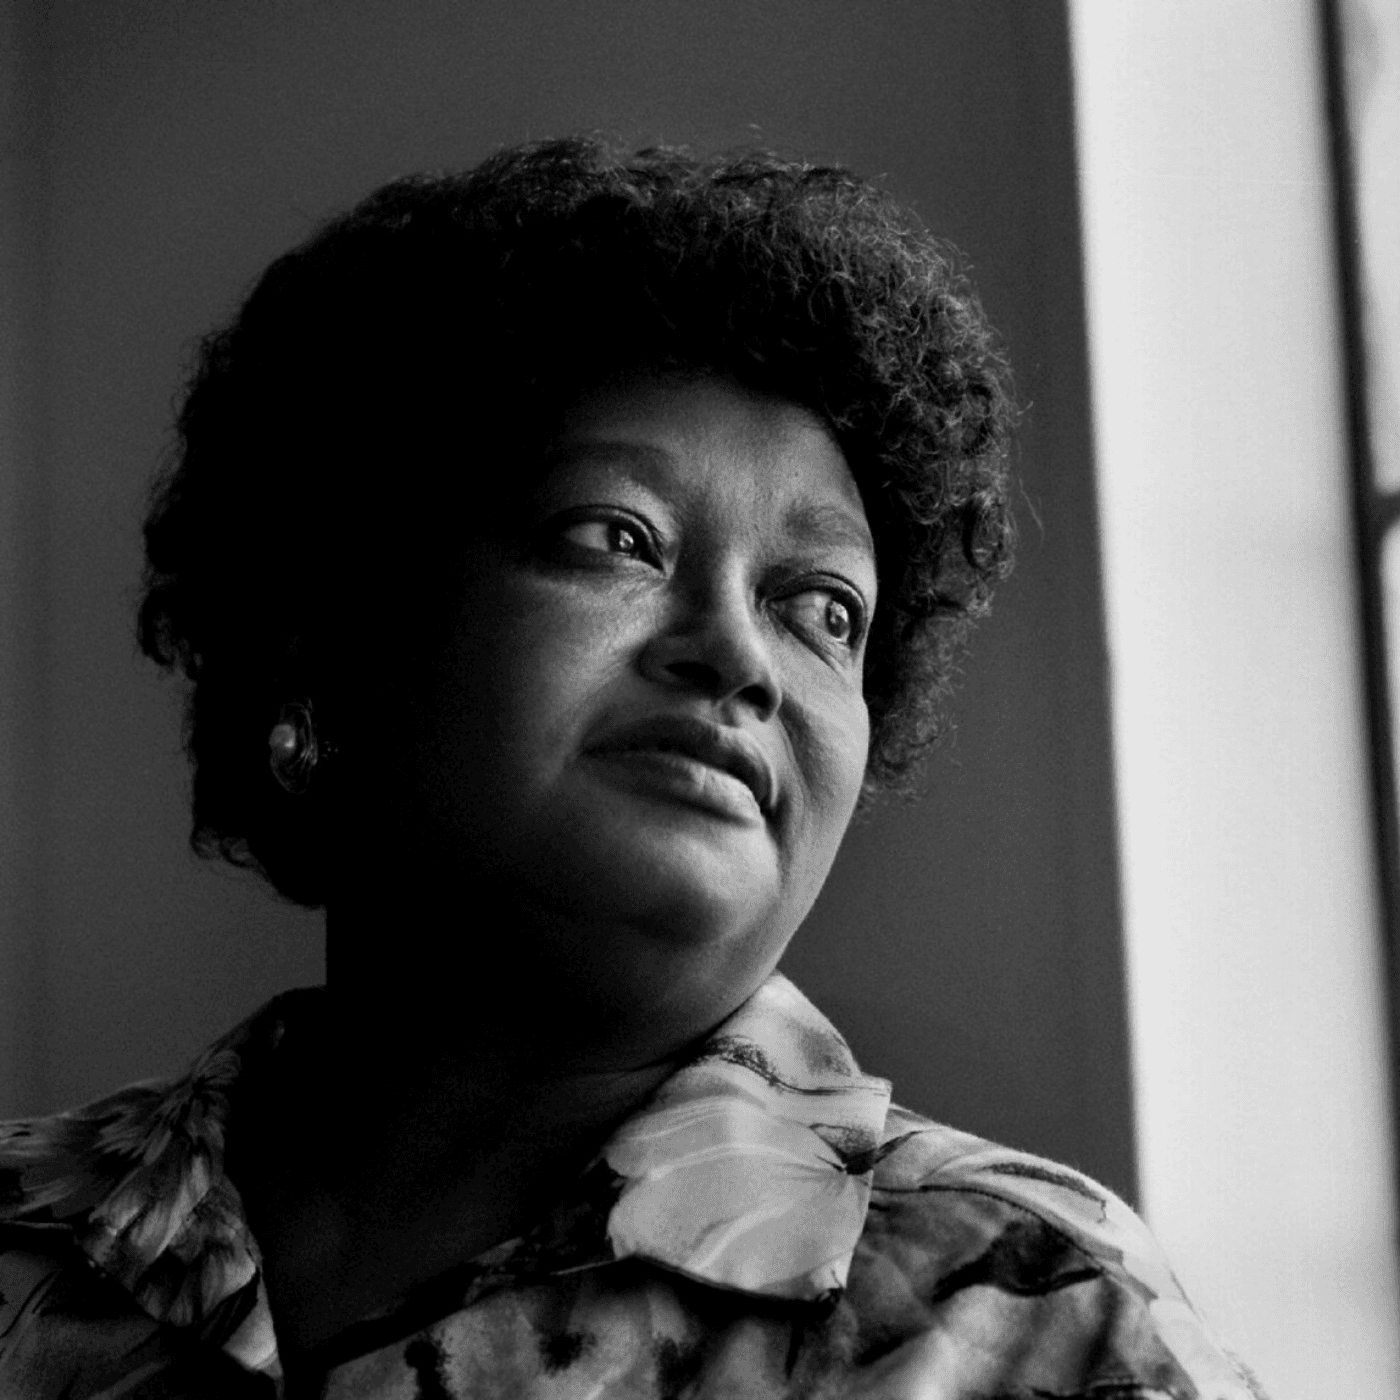 Thumbnail for "Claudette Colvin: Making Trouble Then and Now".